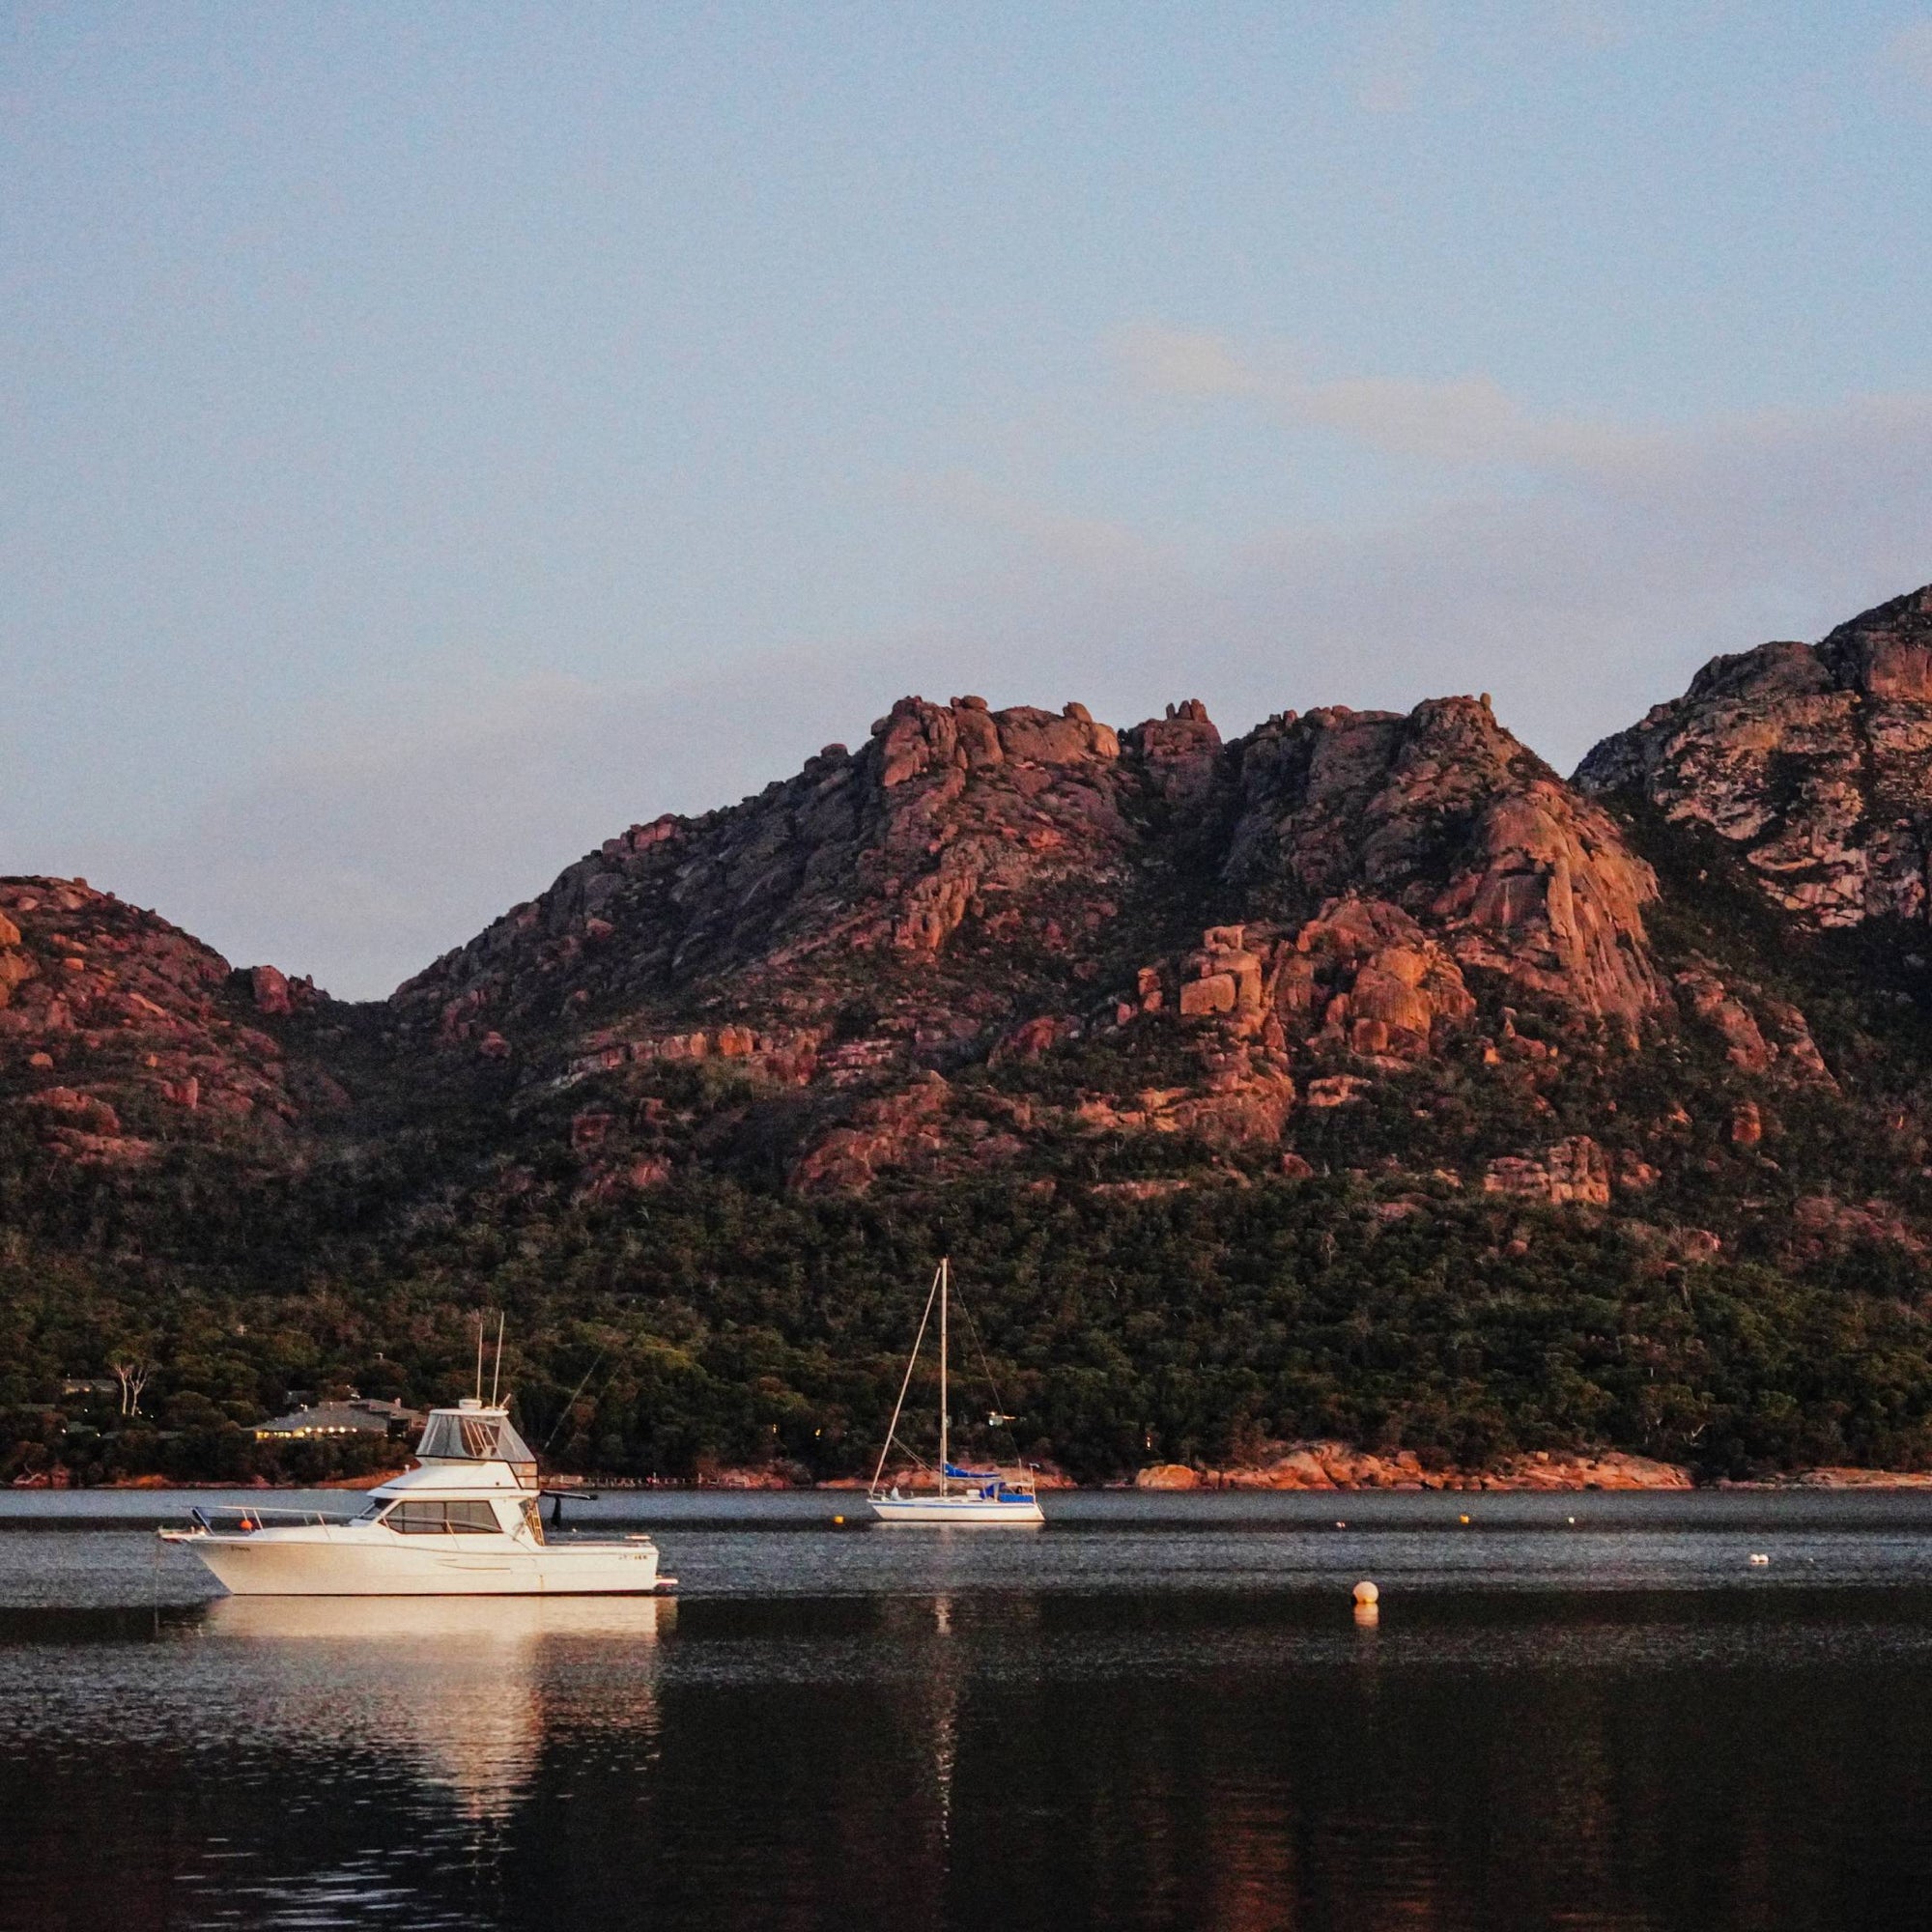 Small yachts anchored in a harbour with a large rocky mountain in the background in Tasmania